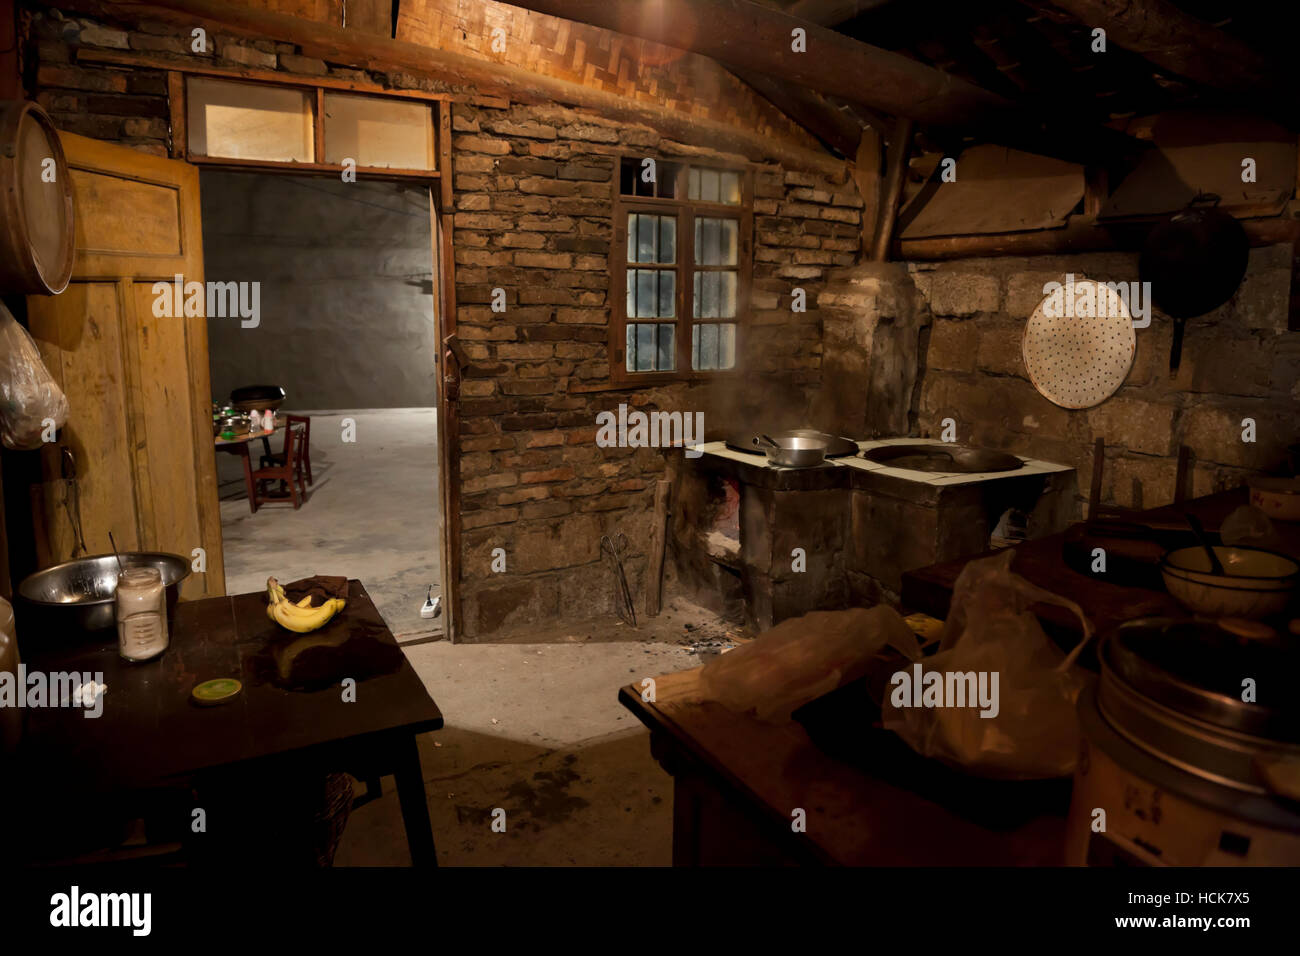 The dingy, rustic kitchen of a farmhouse in the remote mountains of west China. Stock Photo